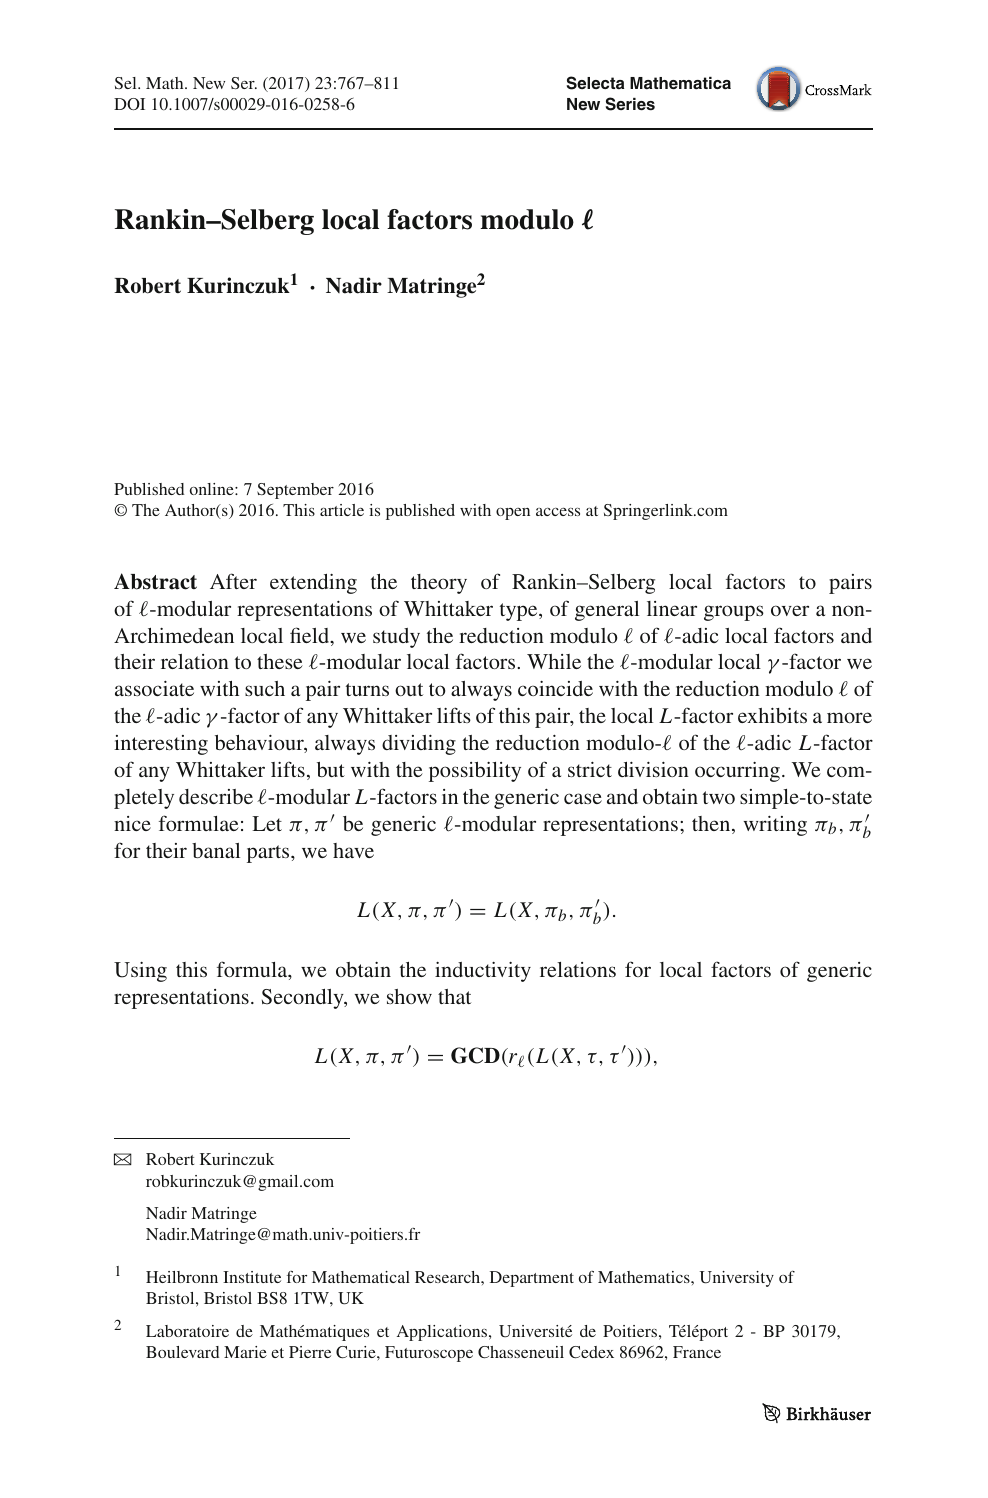 Rankin Selberg Local Factors Modulo Ell ℓ Topic Of Research Paper In Mathematics Download Scholarly Article Pdf And Read For Free On Cyberleninka Open Science Hub